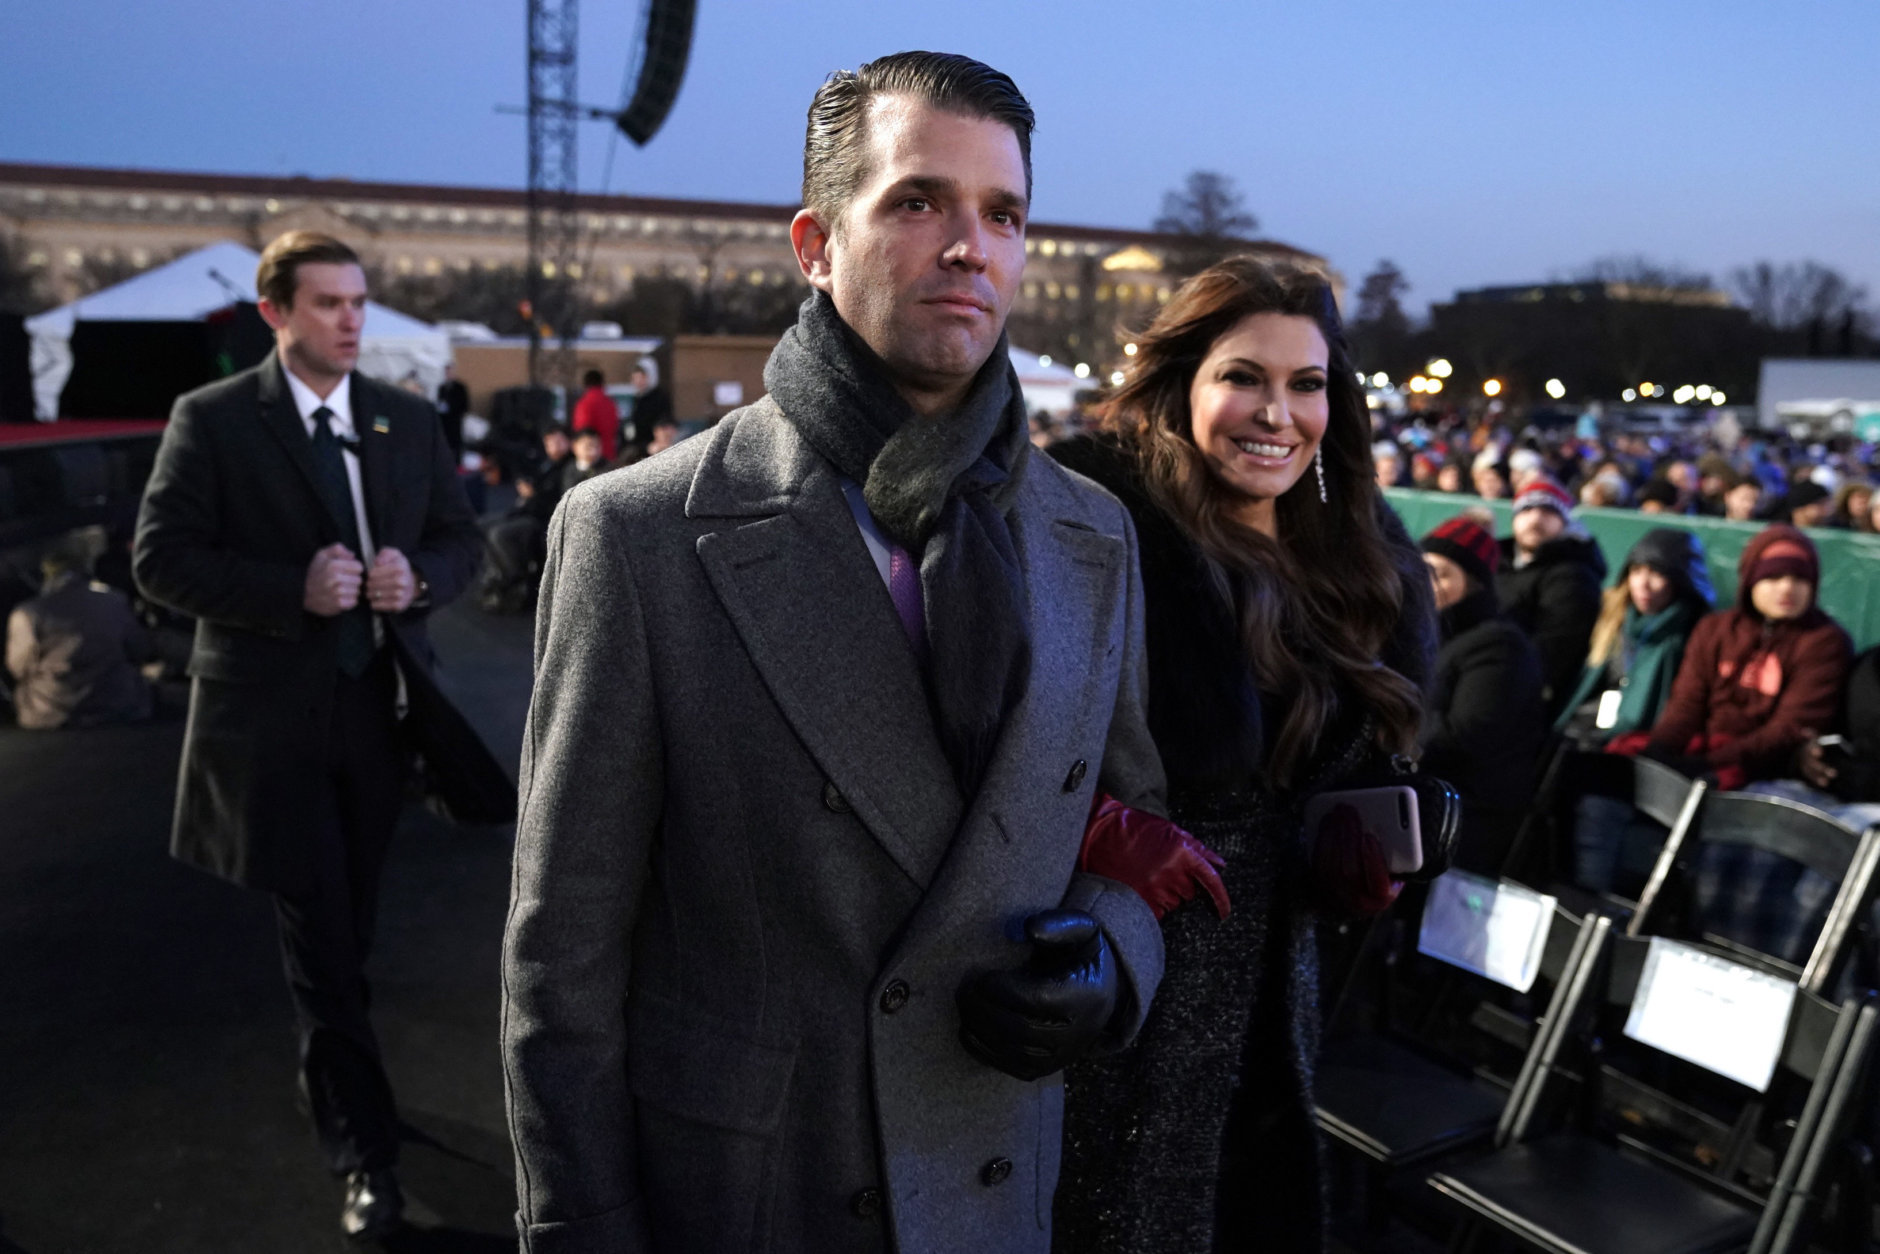 Donald Trump Jr. and Kimberly Guilfoyle arrive ahead of President Donald Trump and first lady Melania Trump for the lighting of the National Christmas Tree lighting ceremony at the Ellipse near the White House in Washington, Wednesday, Nov. 28, 2018. (AP Photo/Andrew Harnik)